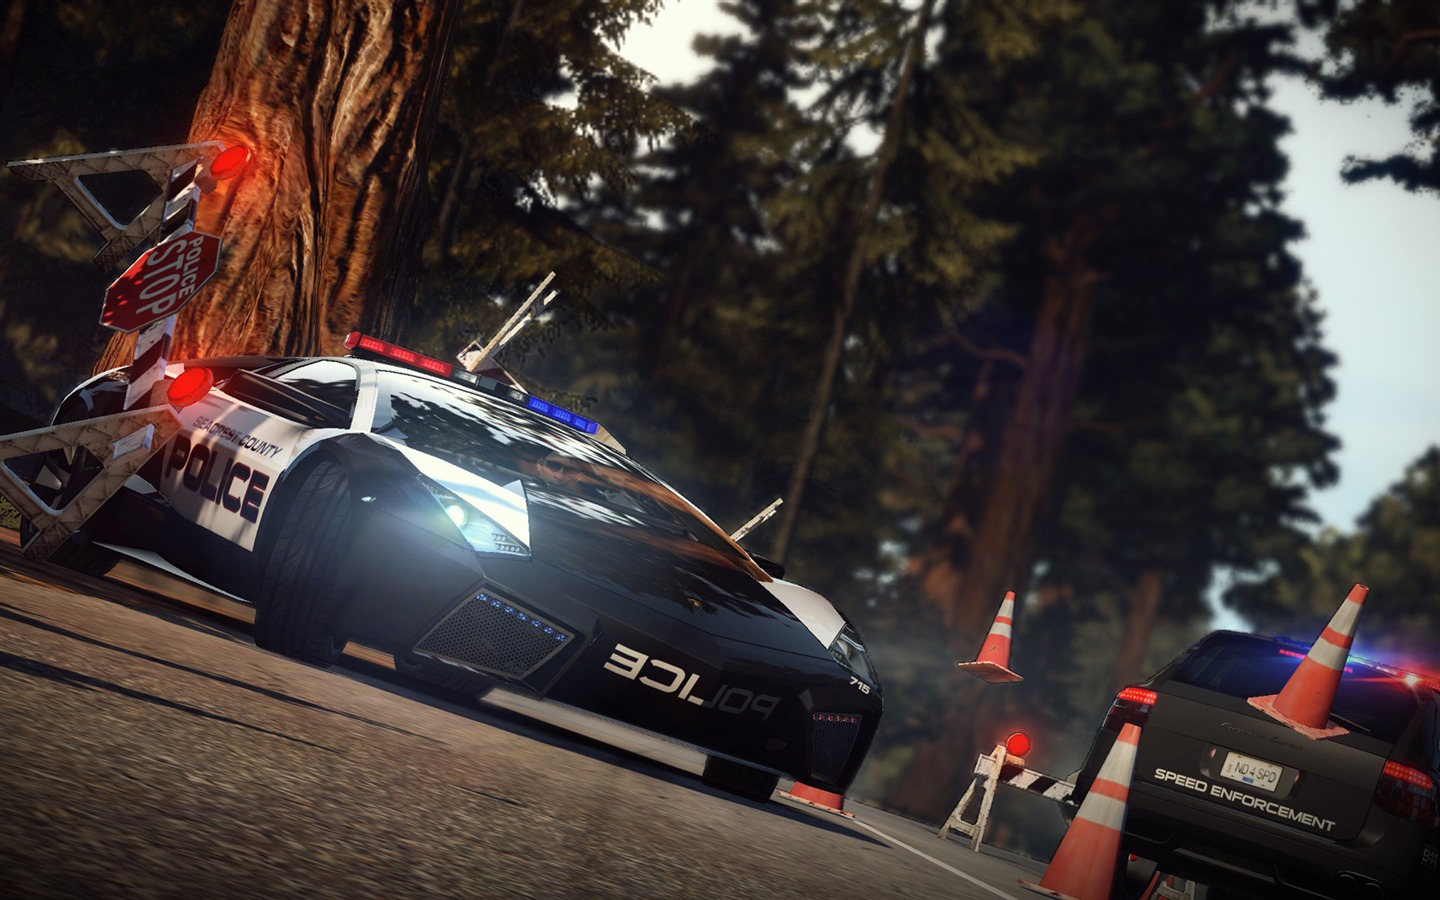 Need for Speed: Hot Pursuit 极品飞车14：热力追踪7 - 1440x900